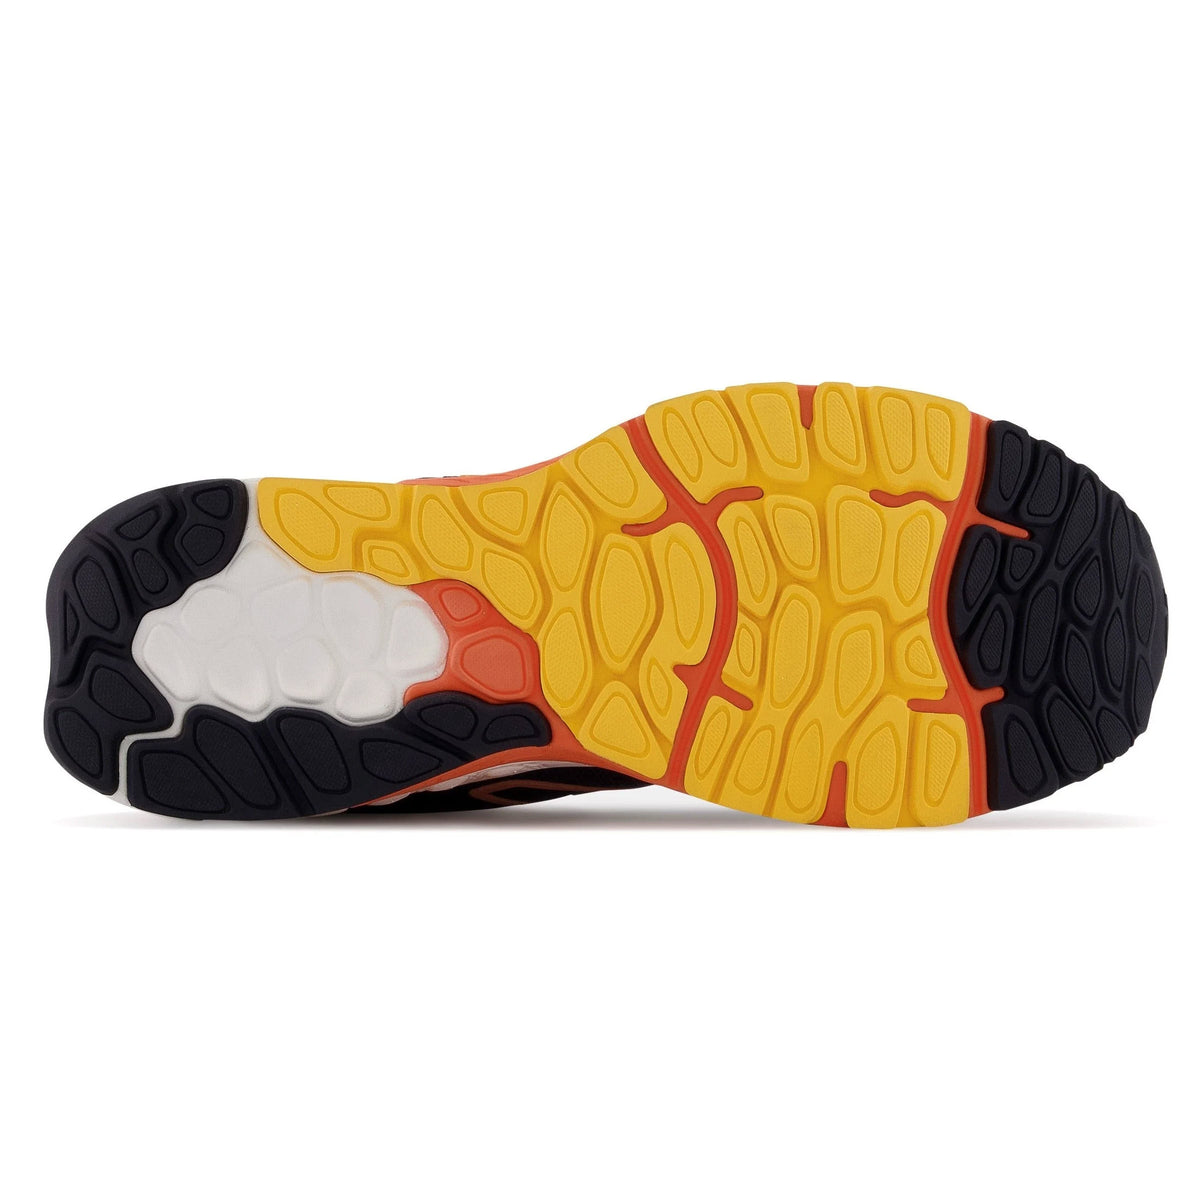 Sole of a New Balance 880v12 Eclipse/Vibrant Apricot - Mens running shoe with distinct orange, yellow, and black tread patterns and white cushioning elements.